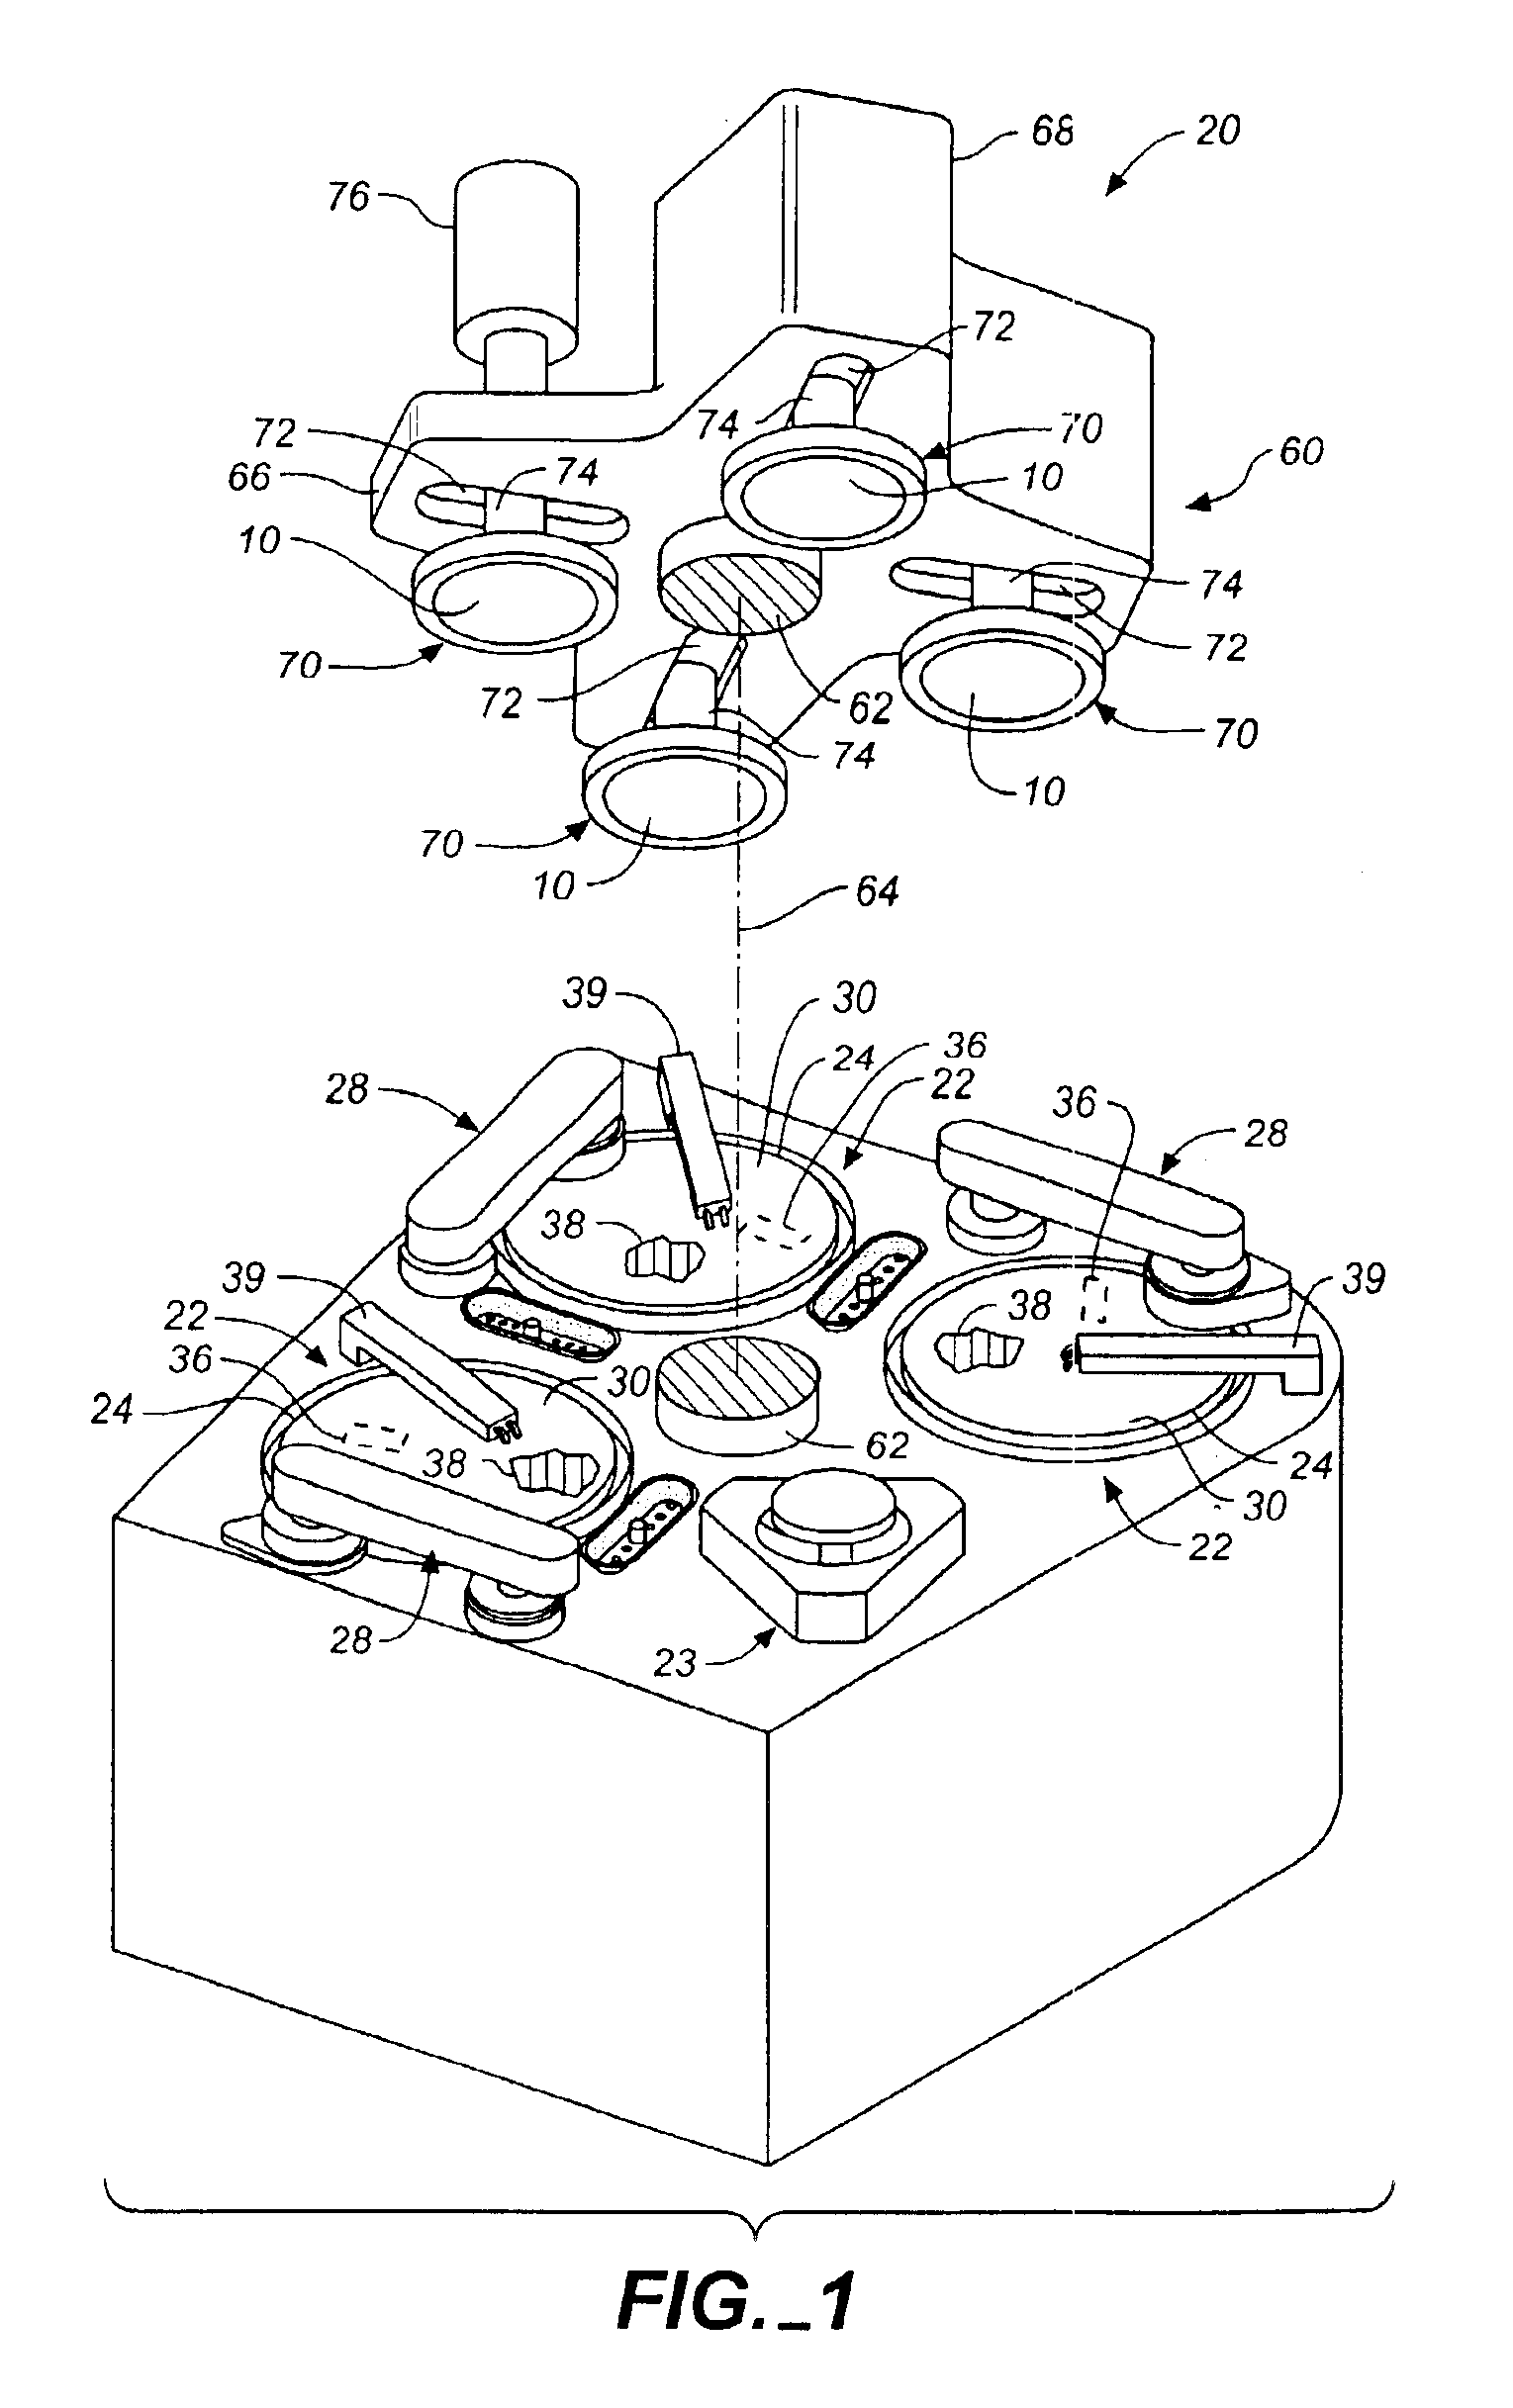 Apparatus for monitoring a metal layer during chemical mechanical polishing using a phase difference signal